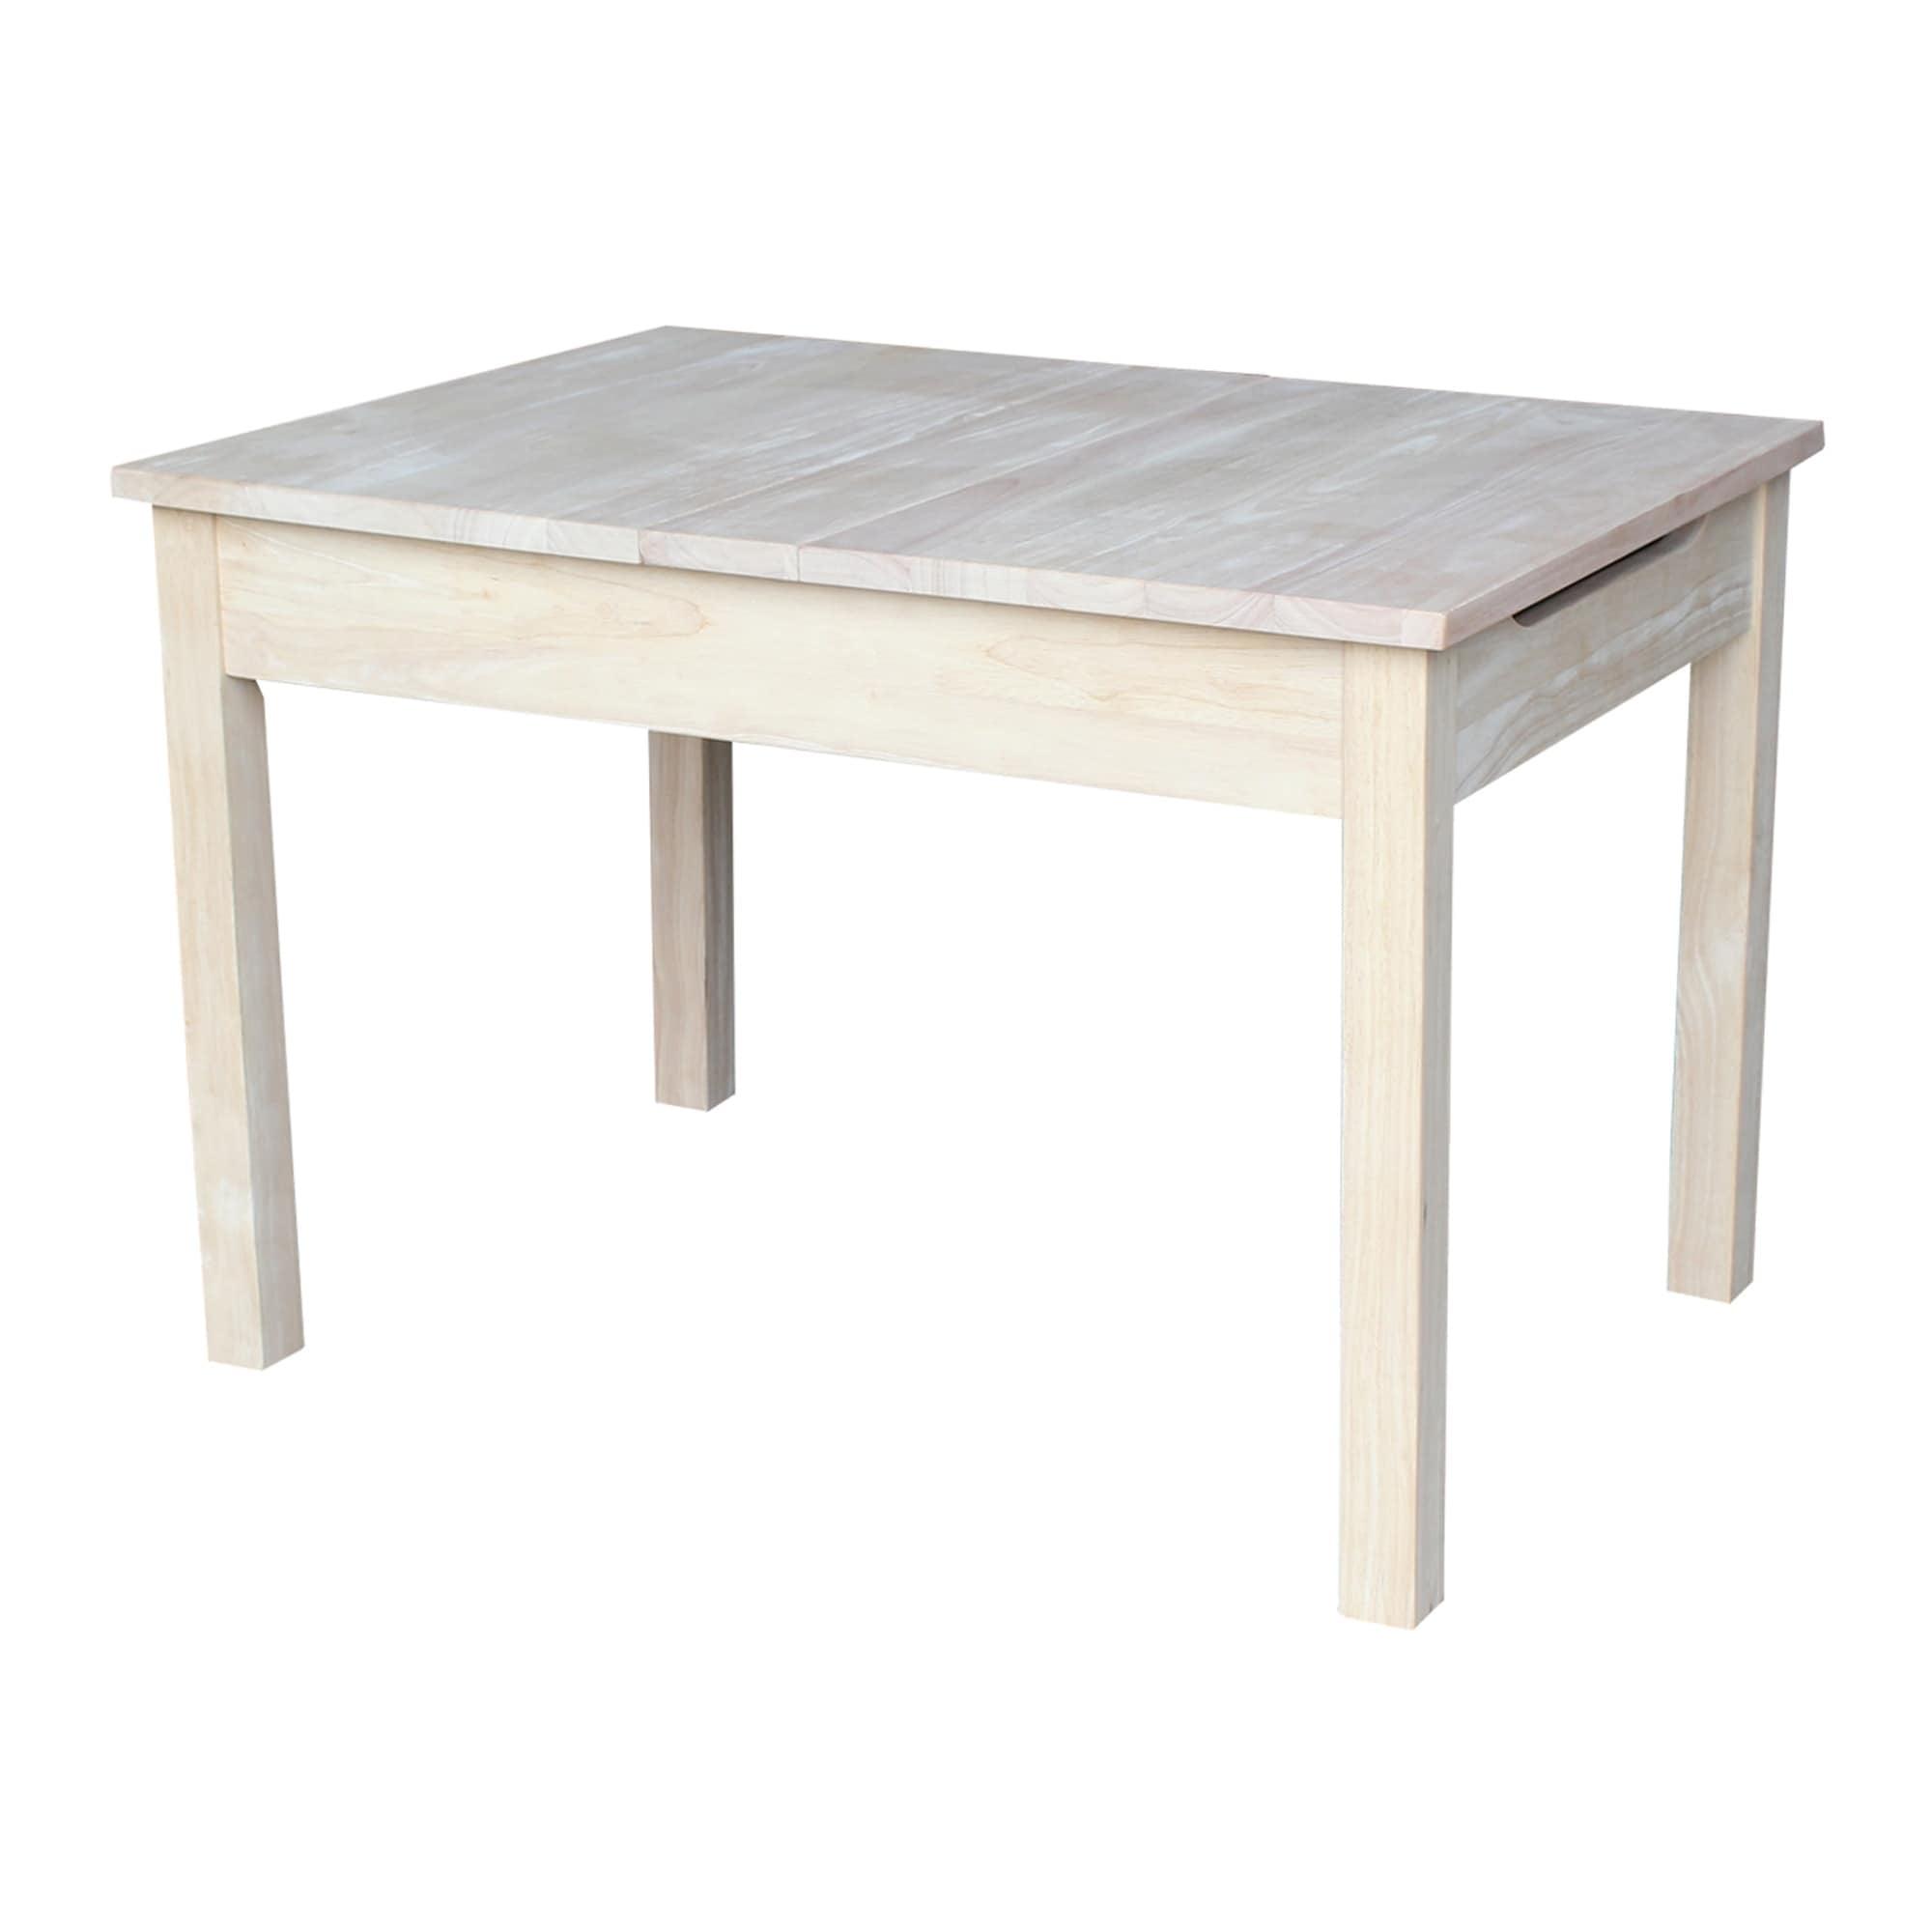 Eco-Friendly Mission Style Unfinished Wood Kids' Craft Table with Storage